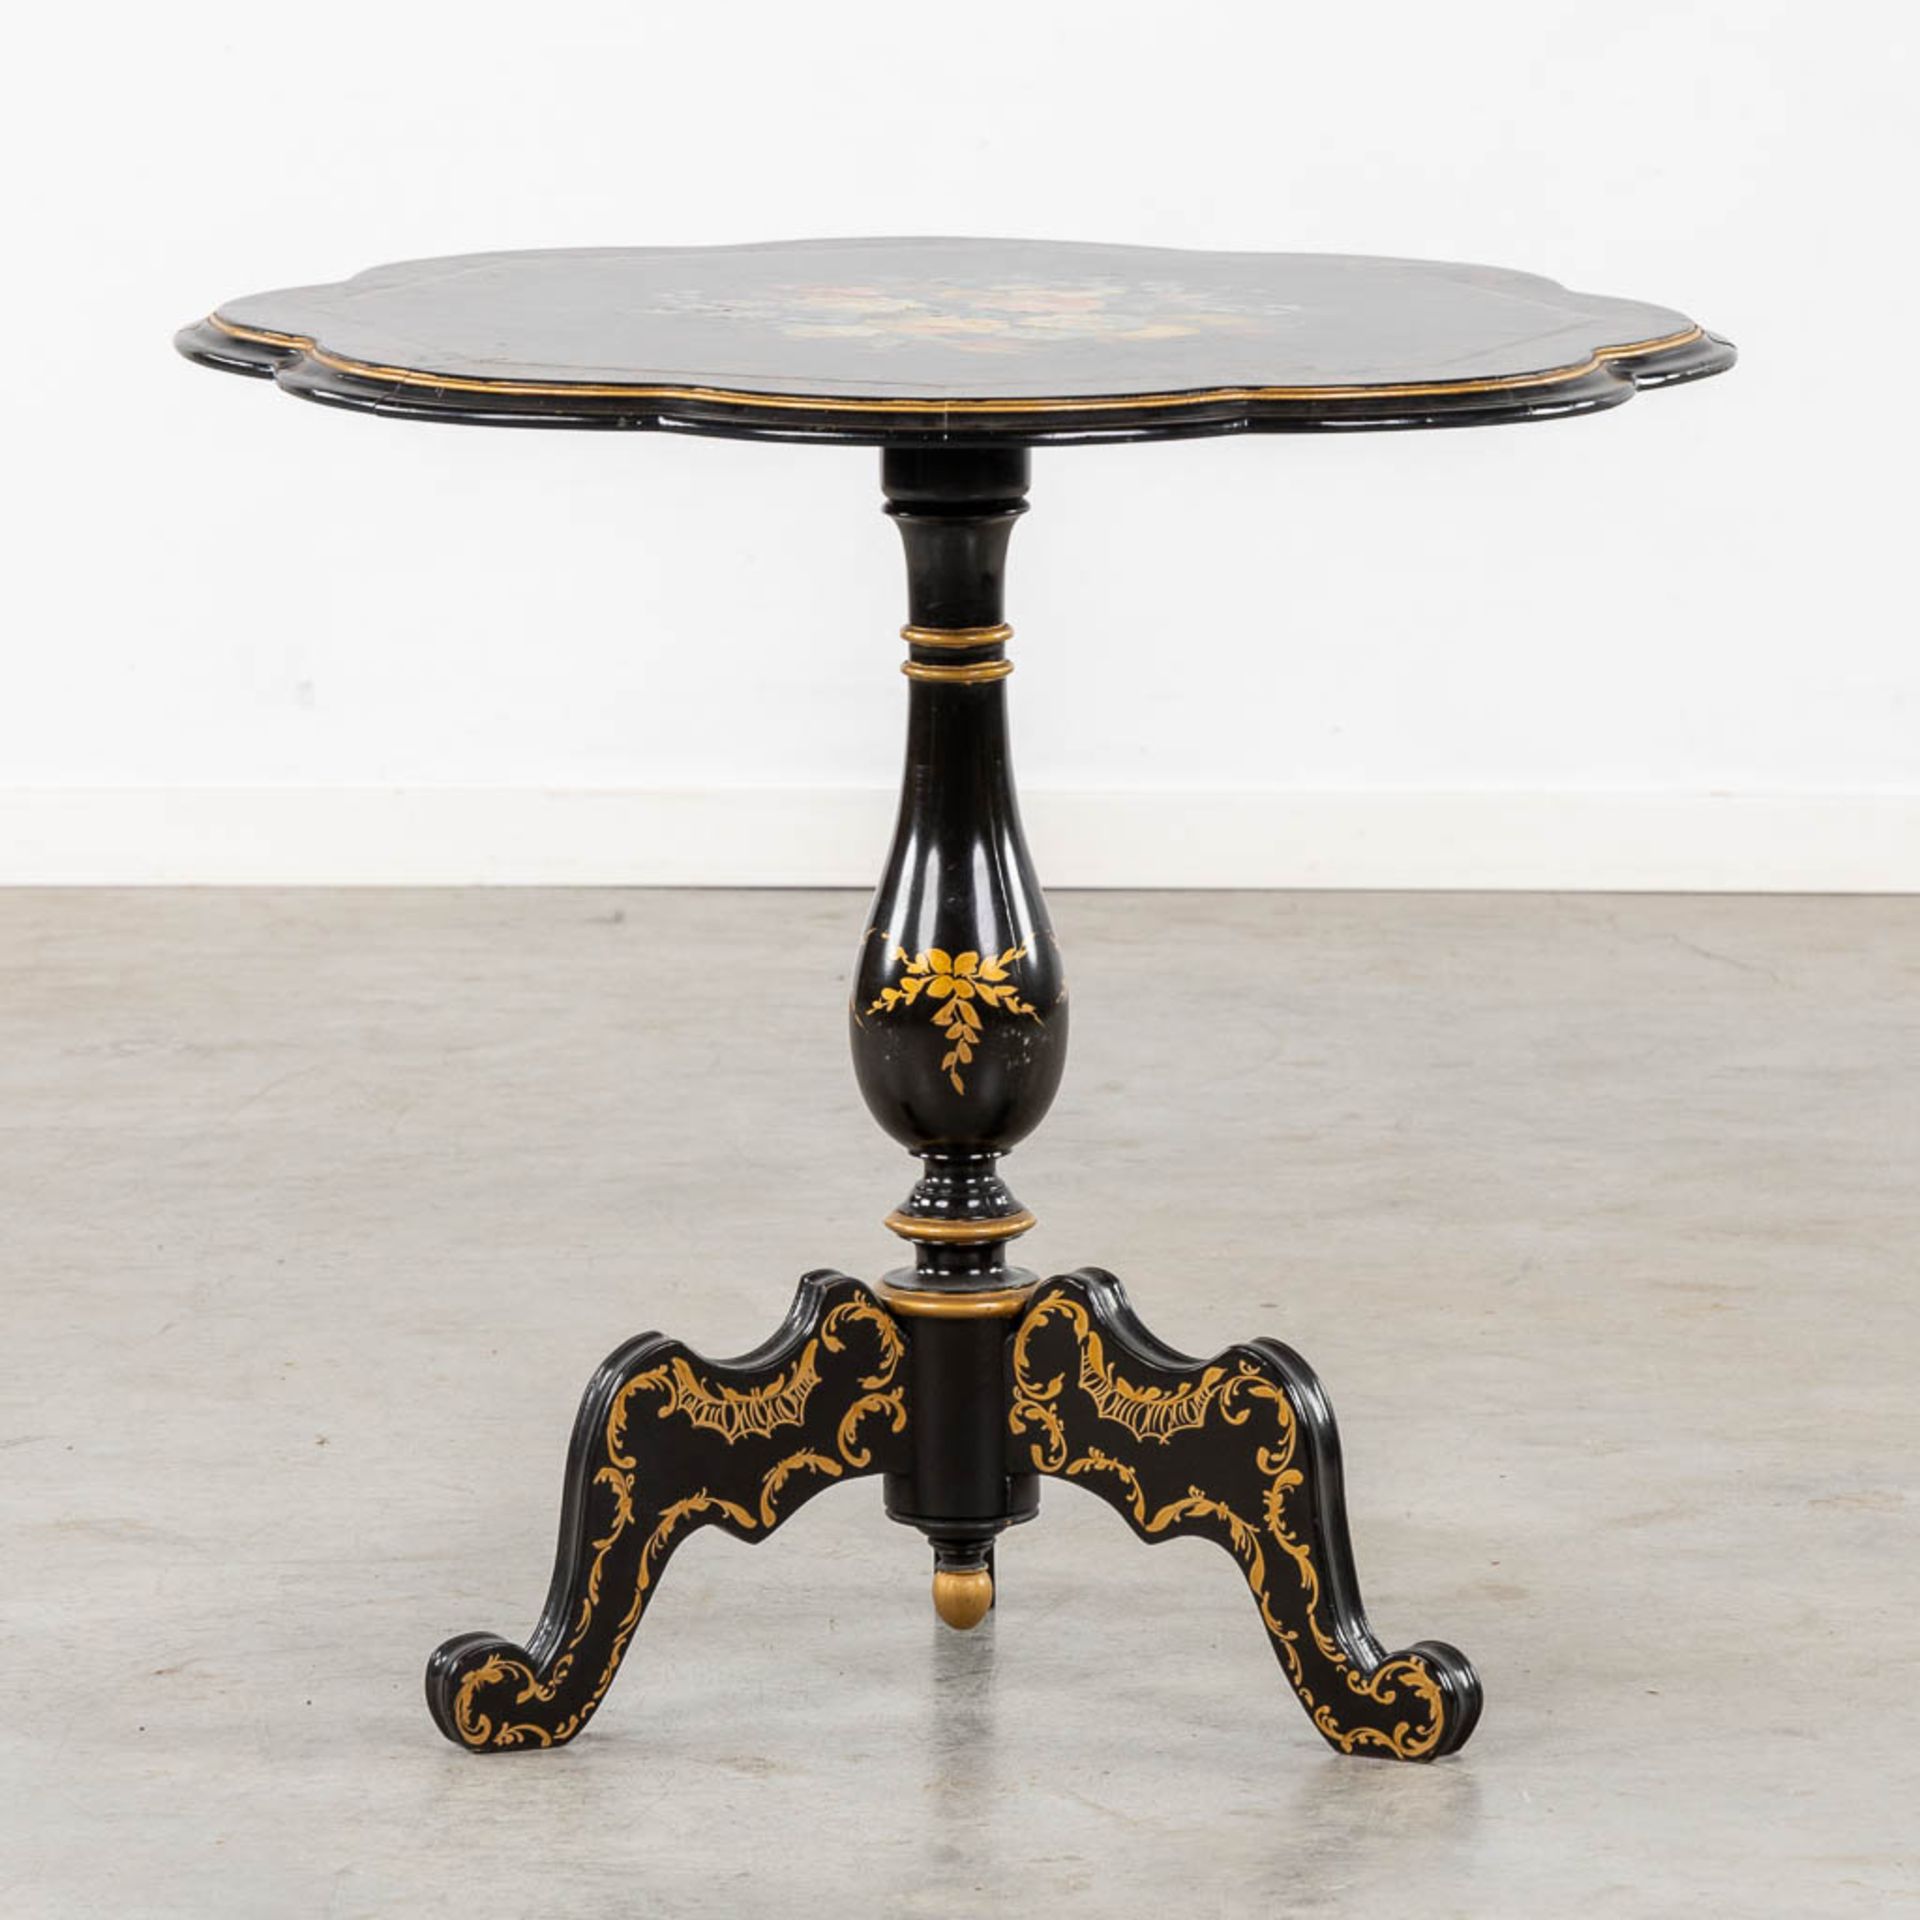 A Tilt-Top table with hand-painted floral decor, Napoleon 3 style. (H:67 x D:72 cm) - Image 4 of 9